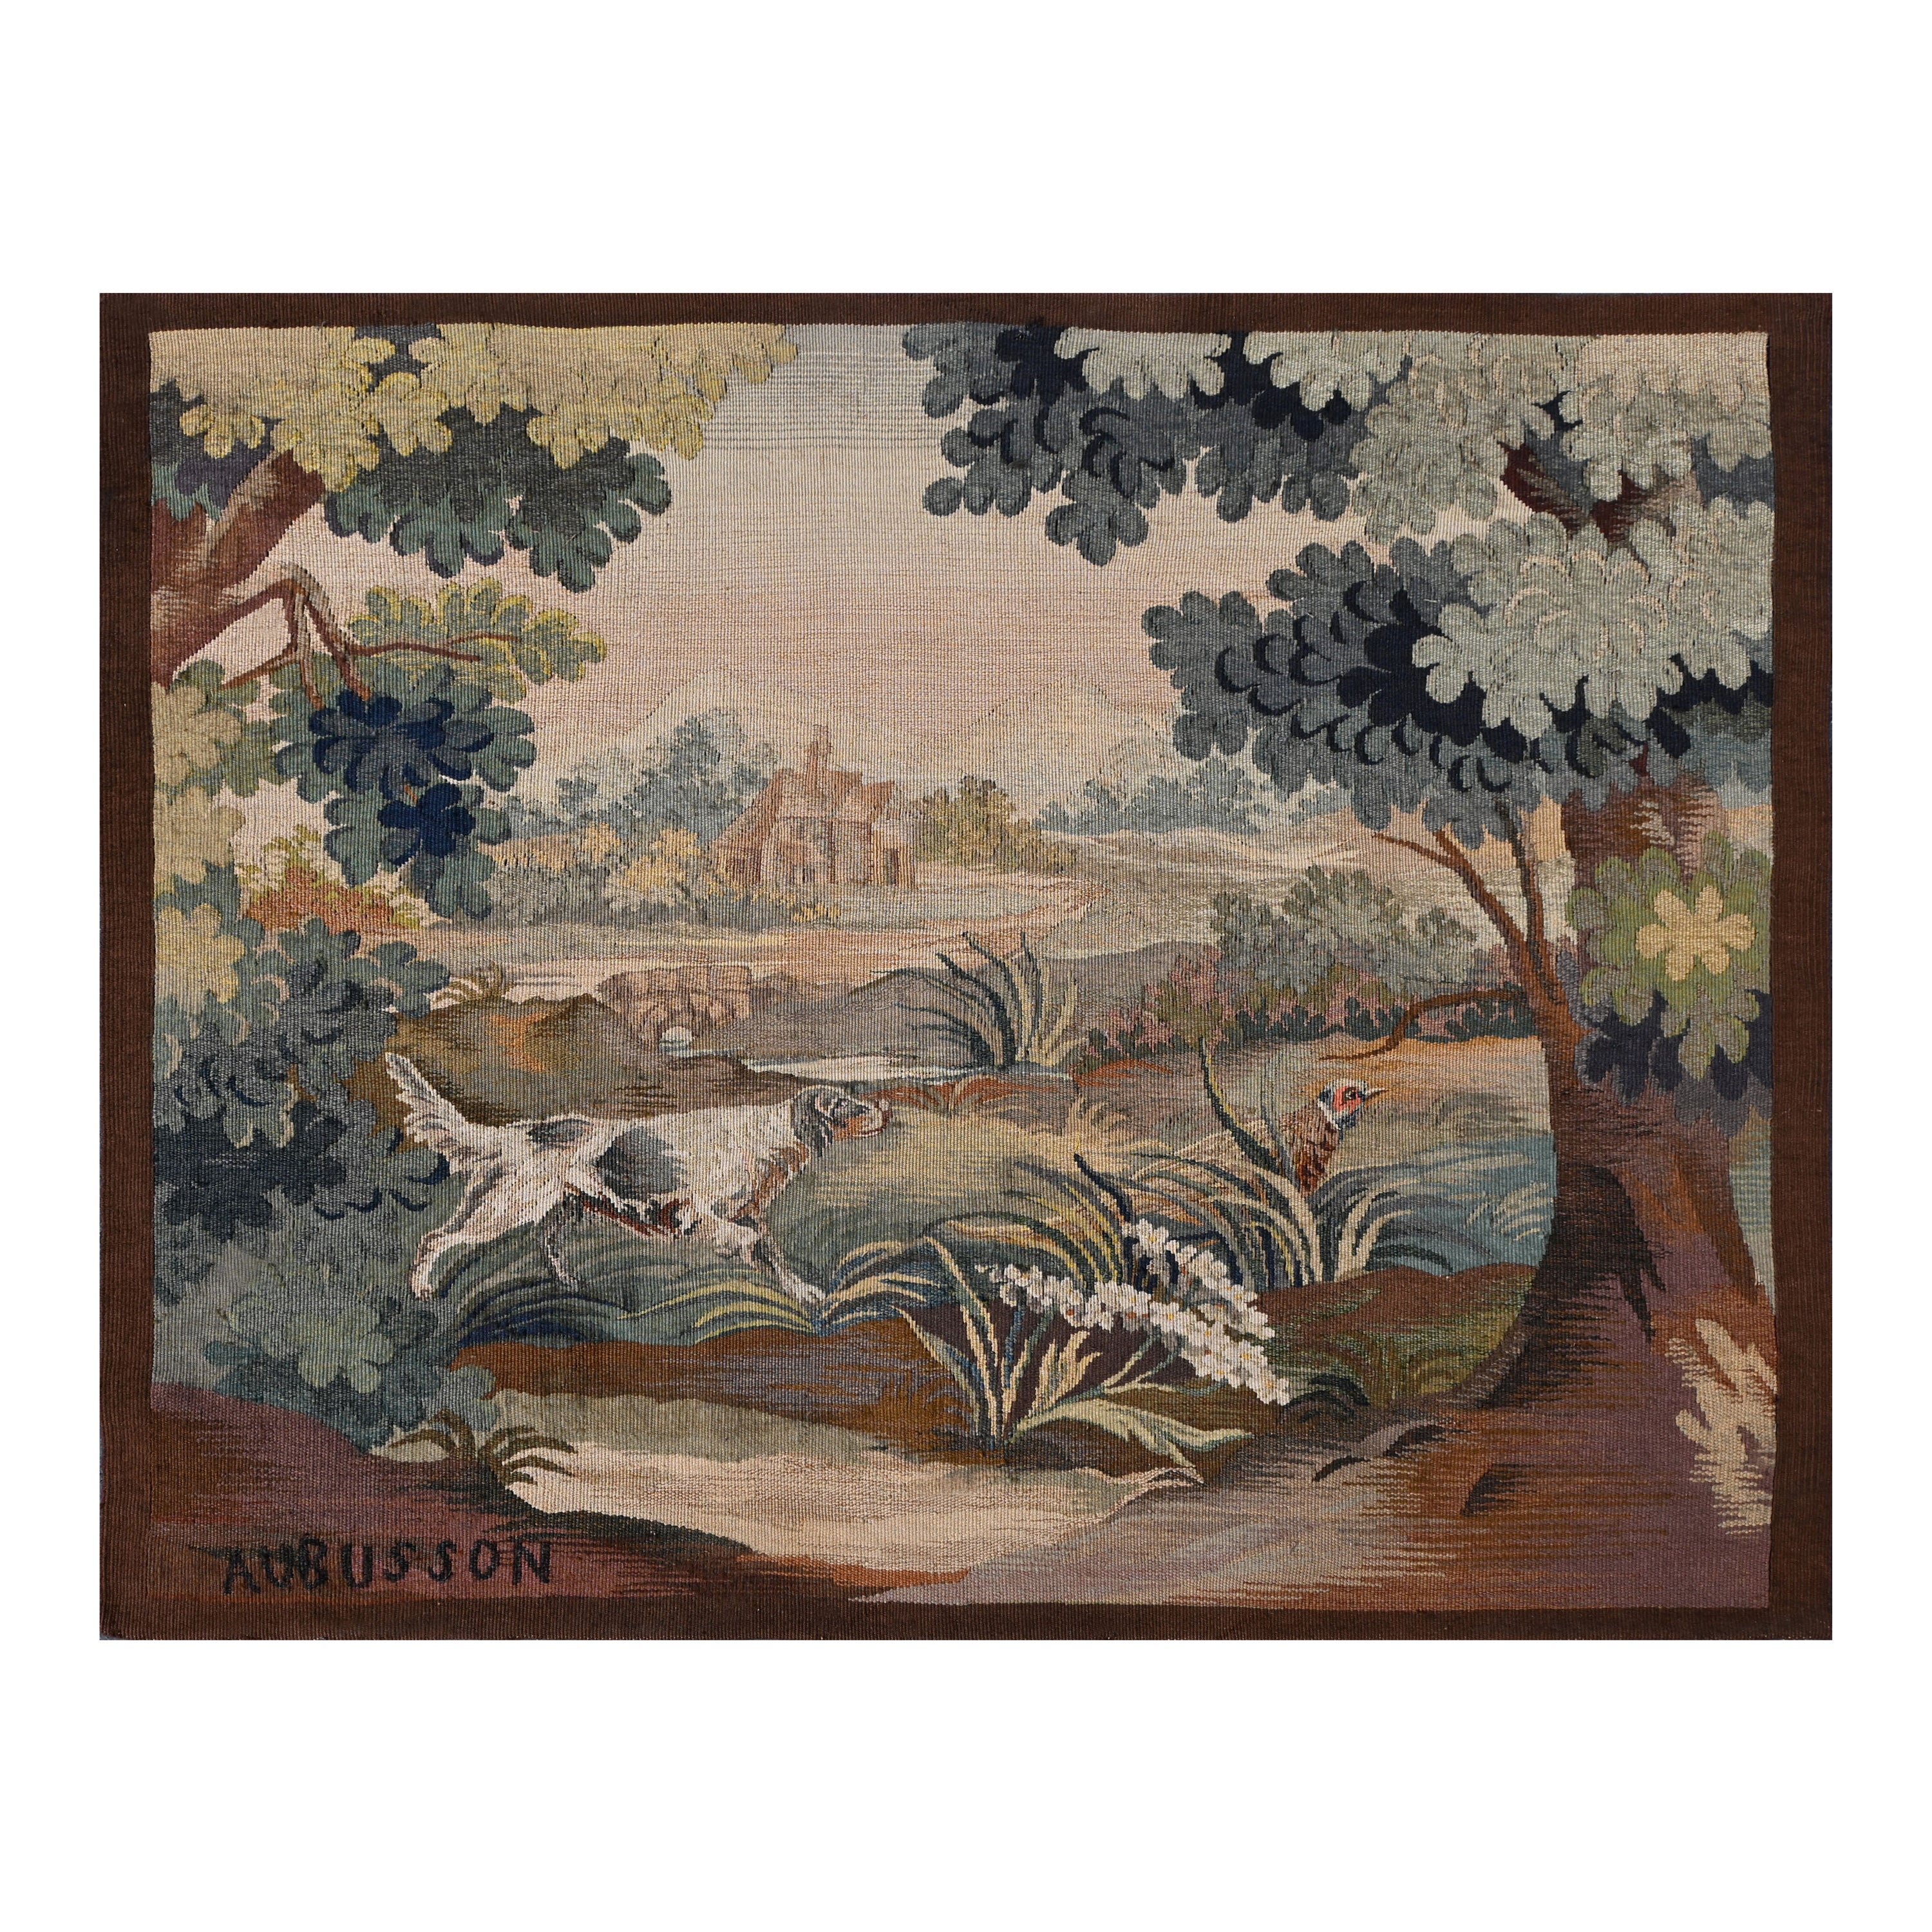 Aubusson Wandteppich - The Dog And Pheasant Nach Jean-Baptiste Oudry - N° 1398